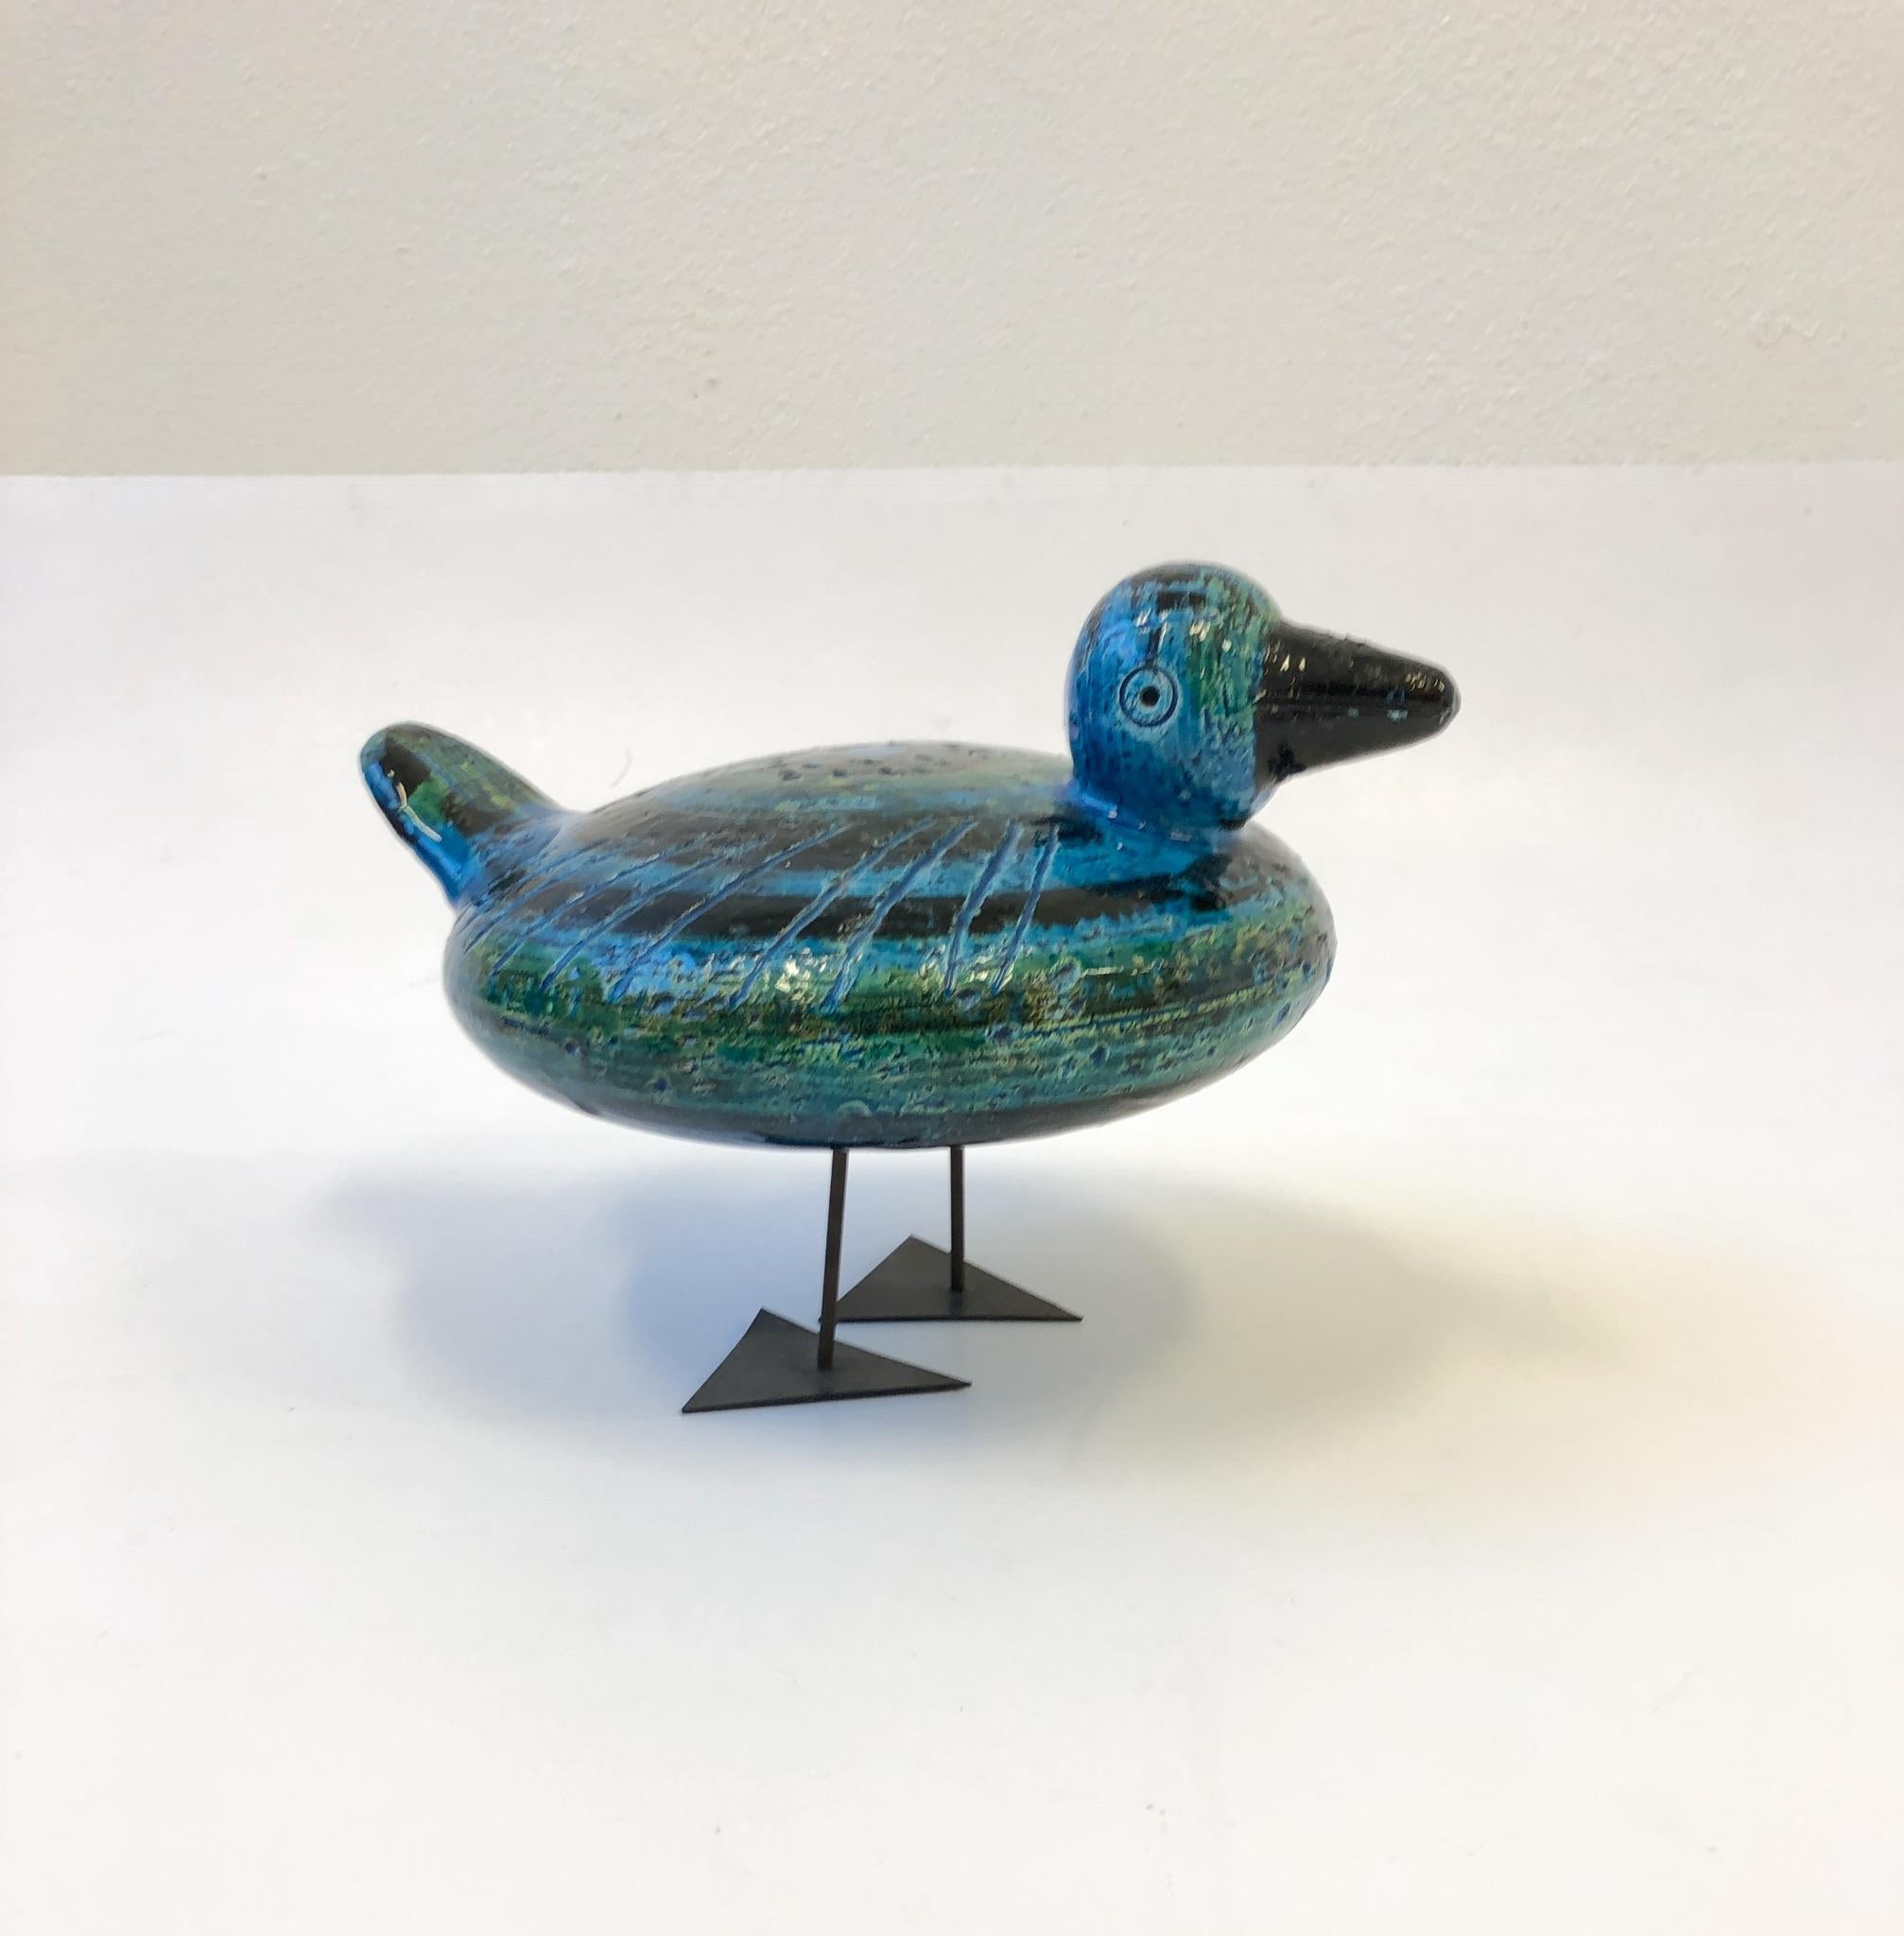 A beautiful rare Italian ceramic duck by Aldo Londi for Raymor from 1960s.
The duck is from the “Rimini Blue” collection, it’s sign made in Italy and still retains the Raymor paper label. The Duck is constructed of ceramic that is glazed and the